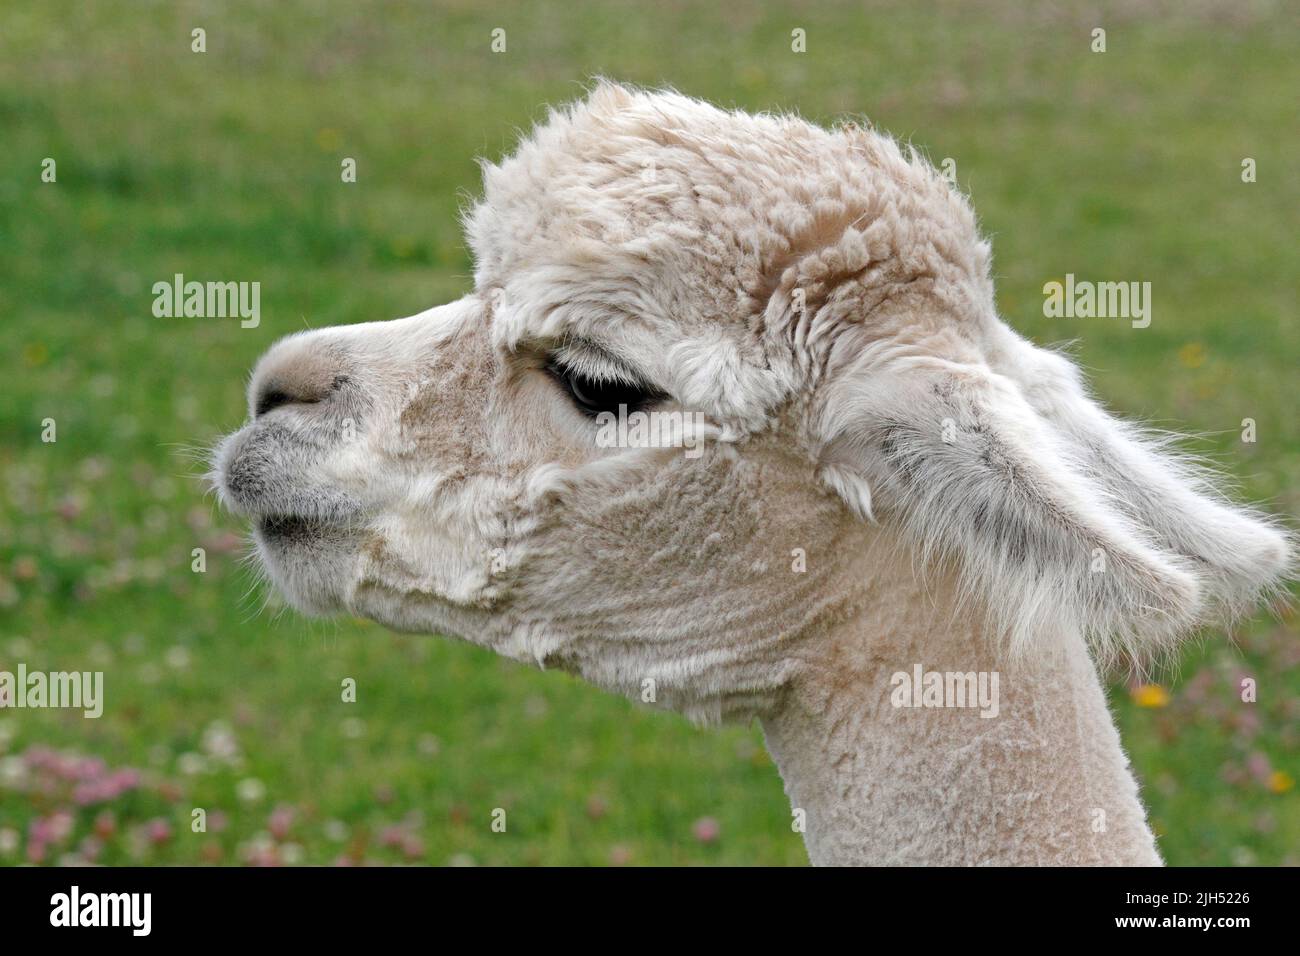 Alpaca, Alpacas, recently groomed, Shawn, sheered. A South American camelid mammal. Stock Photo